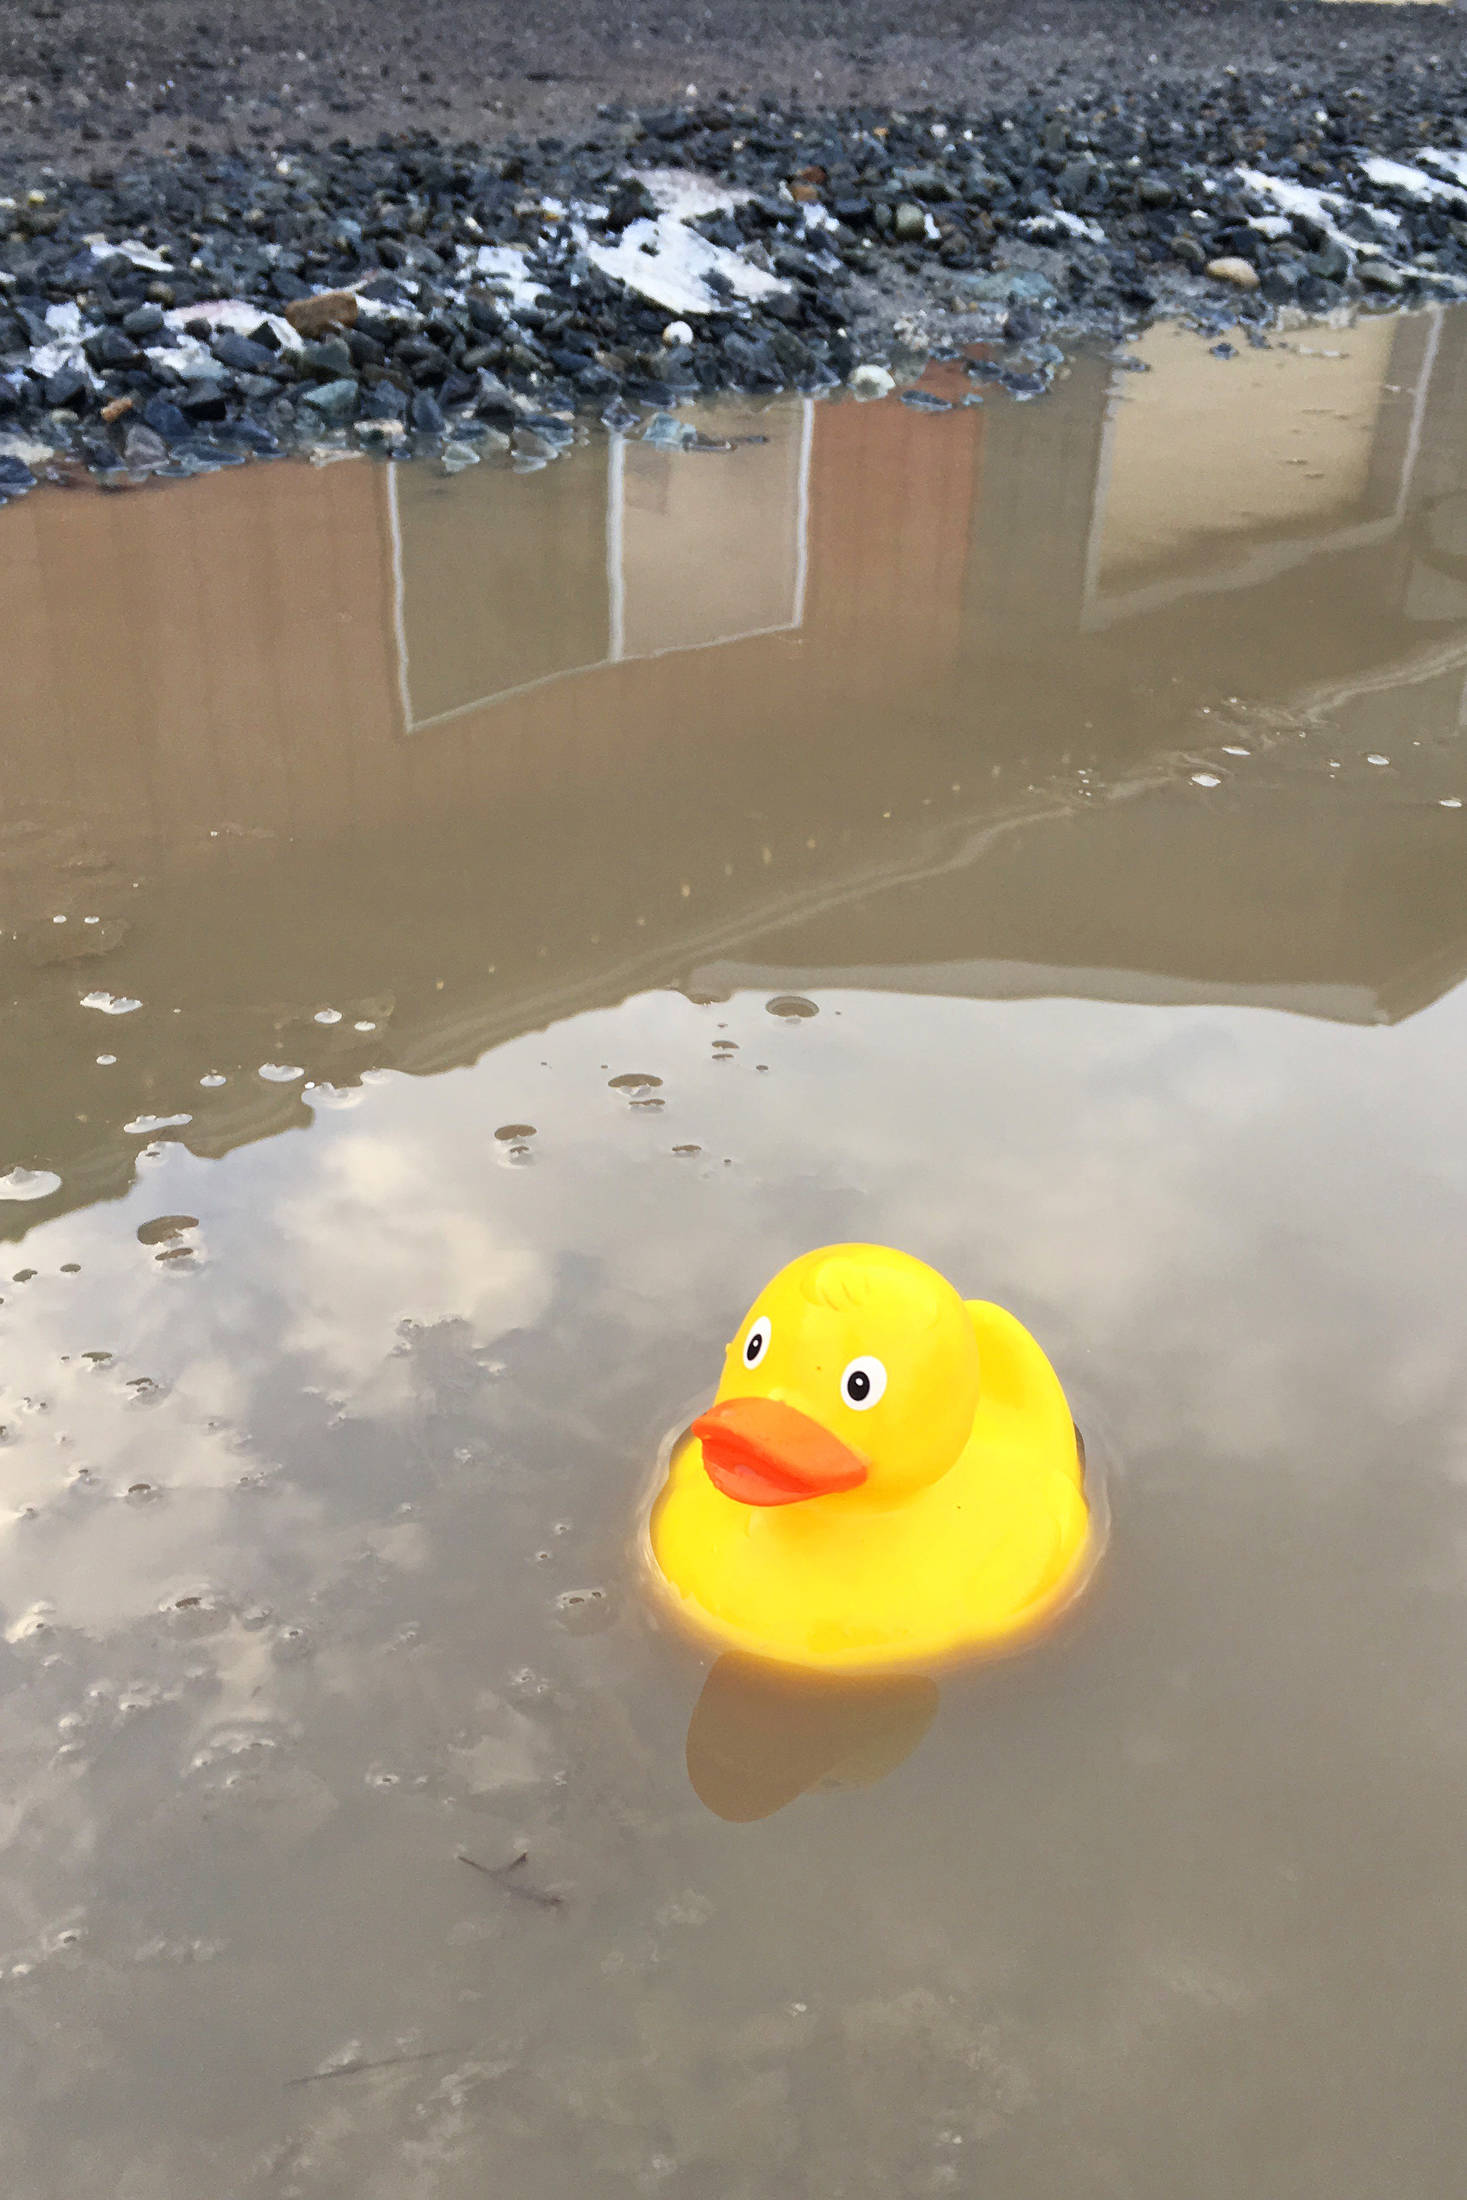 A small rubber duck rests in a puddle, welcoming customers on their way into The Bagel Shop, on Monday, Nov. 19, 2018 on East End Road in Homer, Alaska. (Photo by Megan Pacer/Homer News)